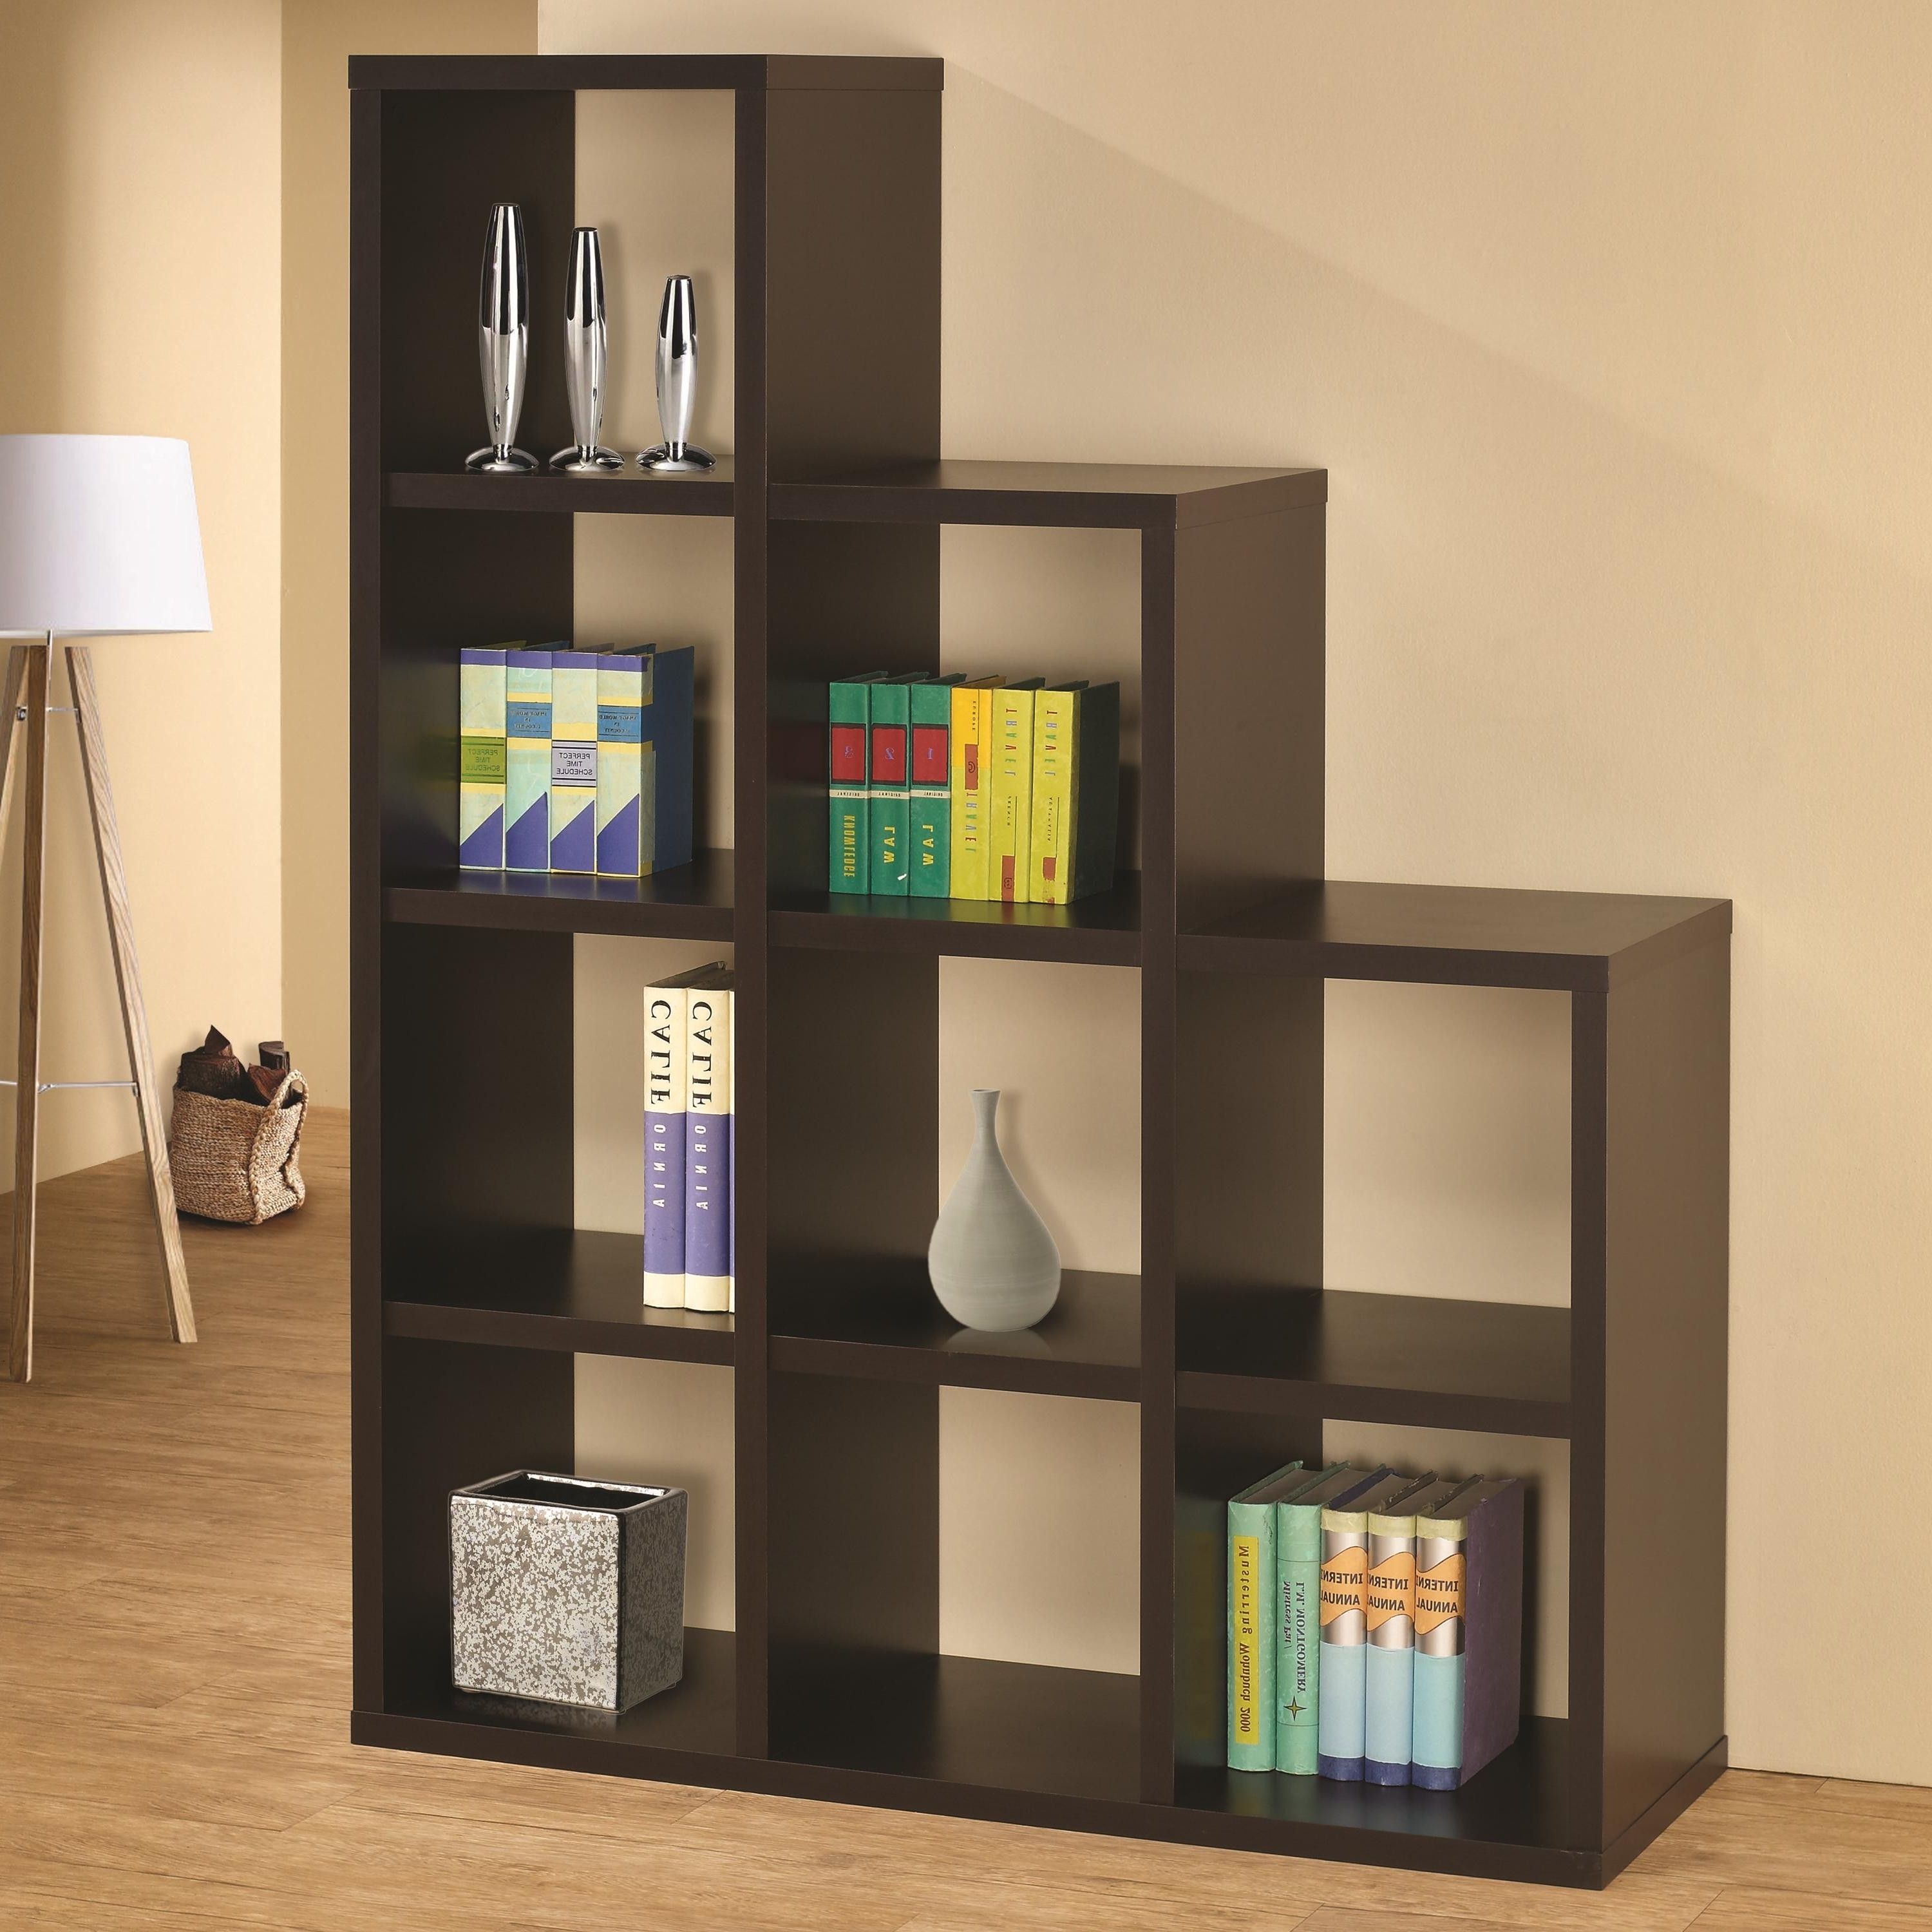 Most Popular Bookcases Ideas: Storage Bookcase Best Ever Full Bookcase Storage Pertaining To Storage Bookcases (View 5 of 15)